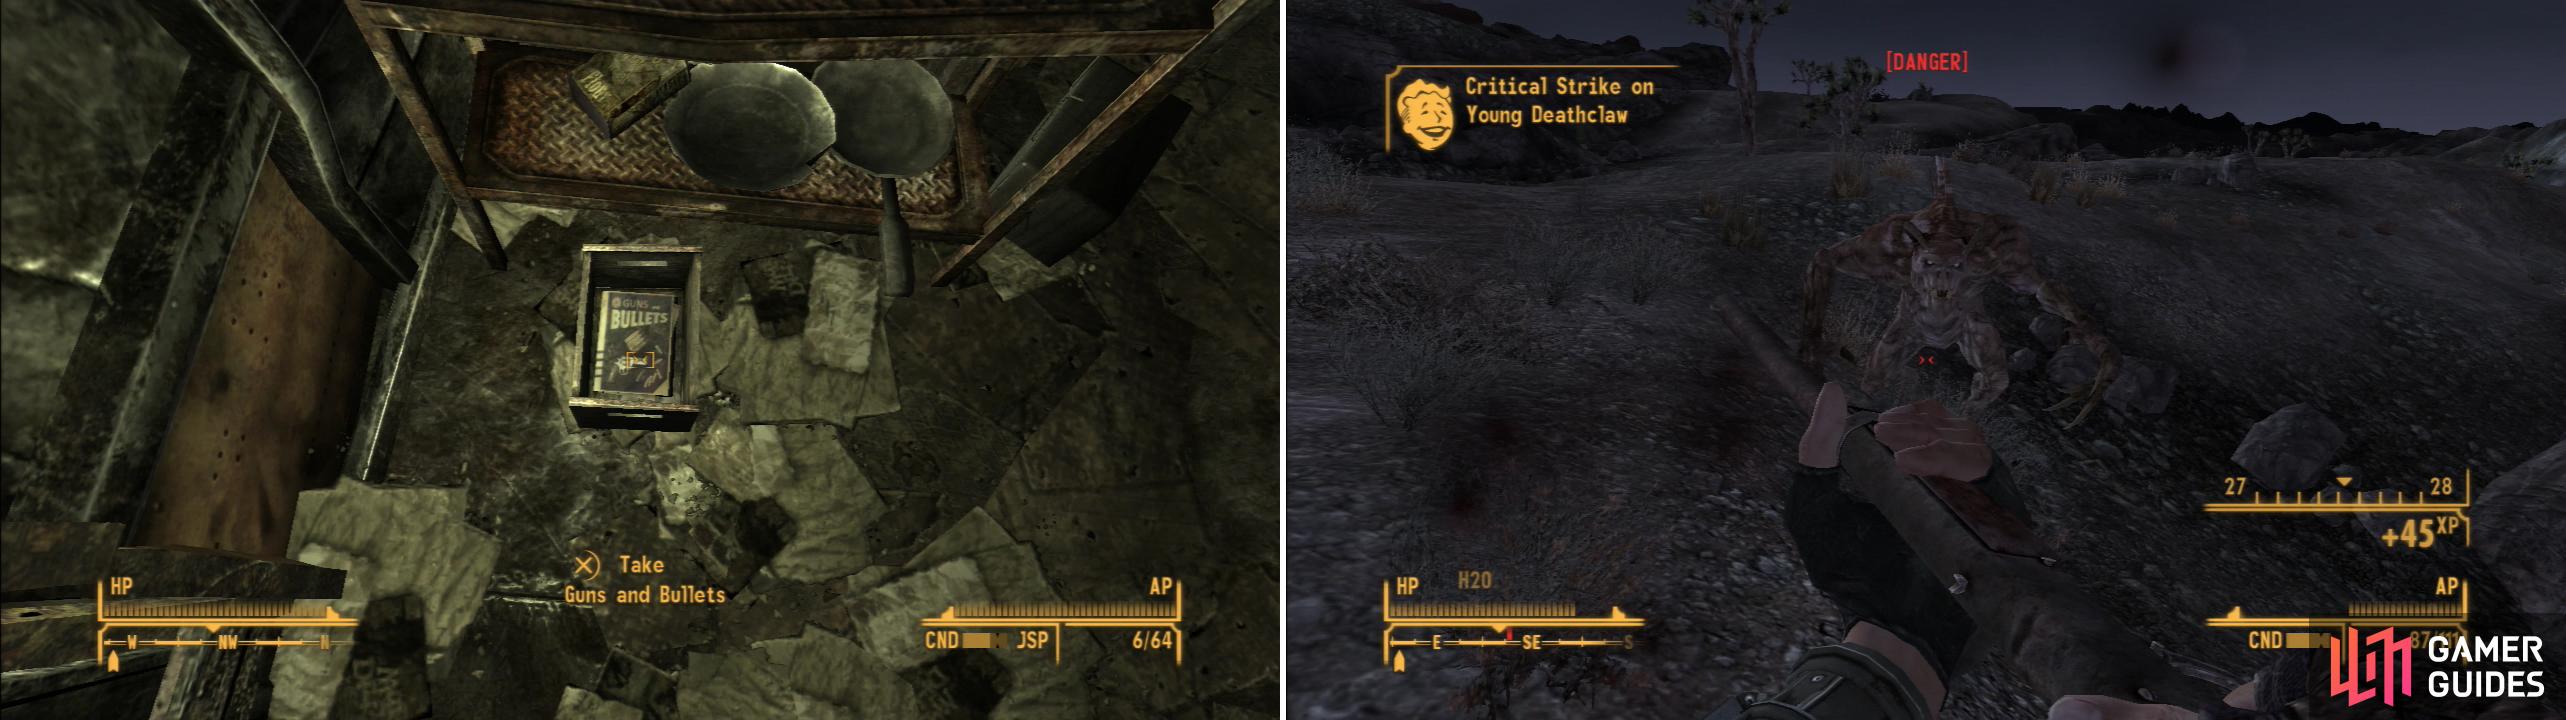 Grab the copy of Guns and Bullets from Raul’s Shack (left) but beware, as Deathclaws lurk to the east (right).